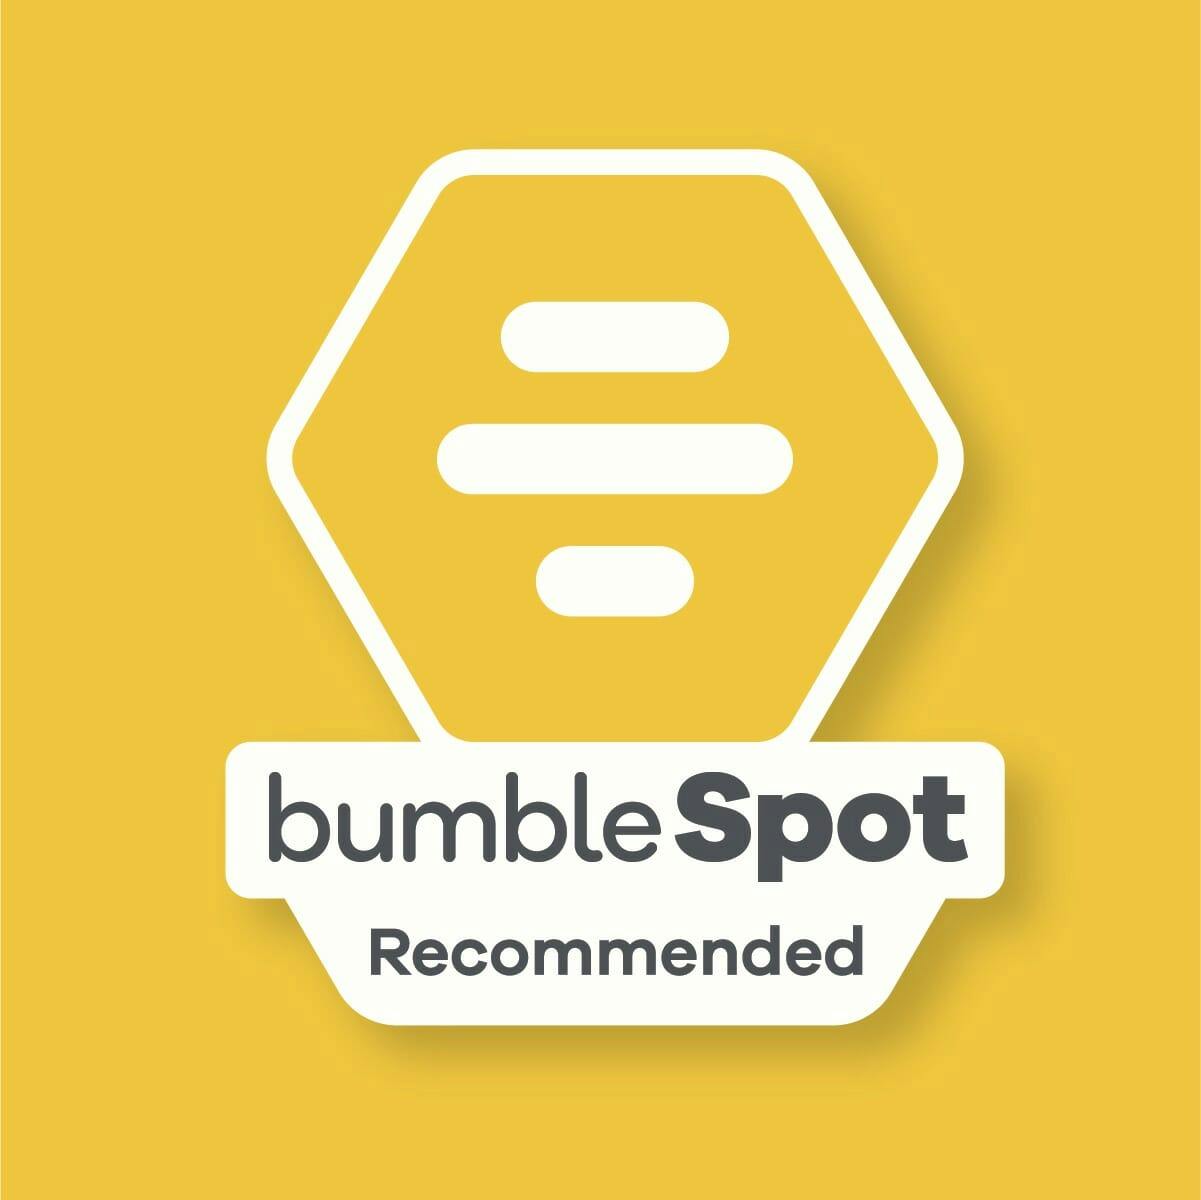 BumbleSpot Recommended